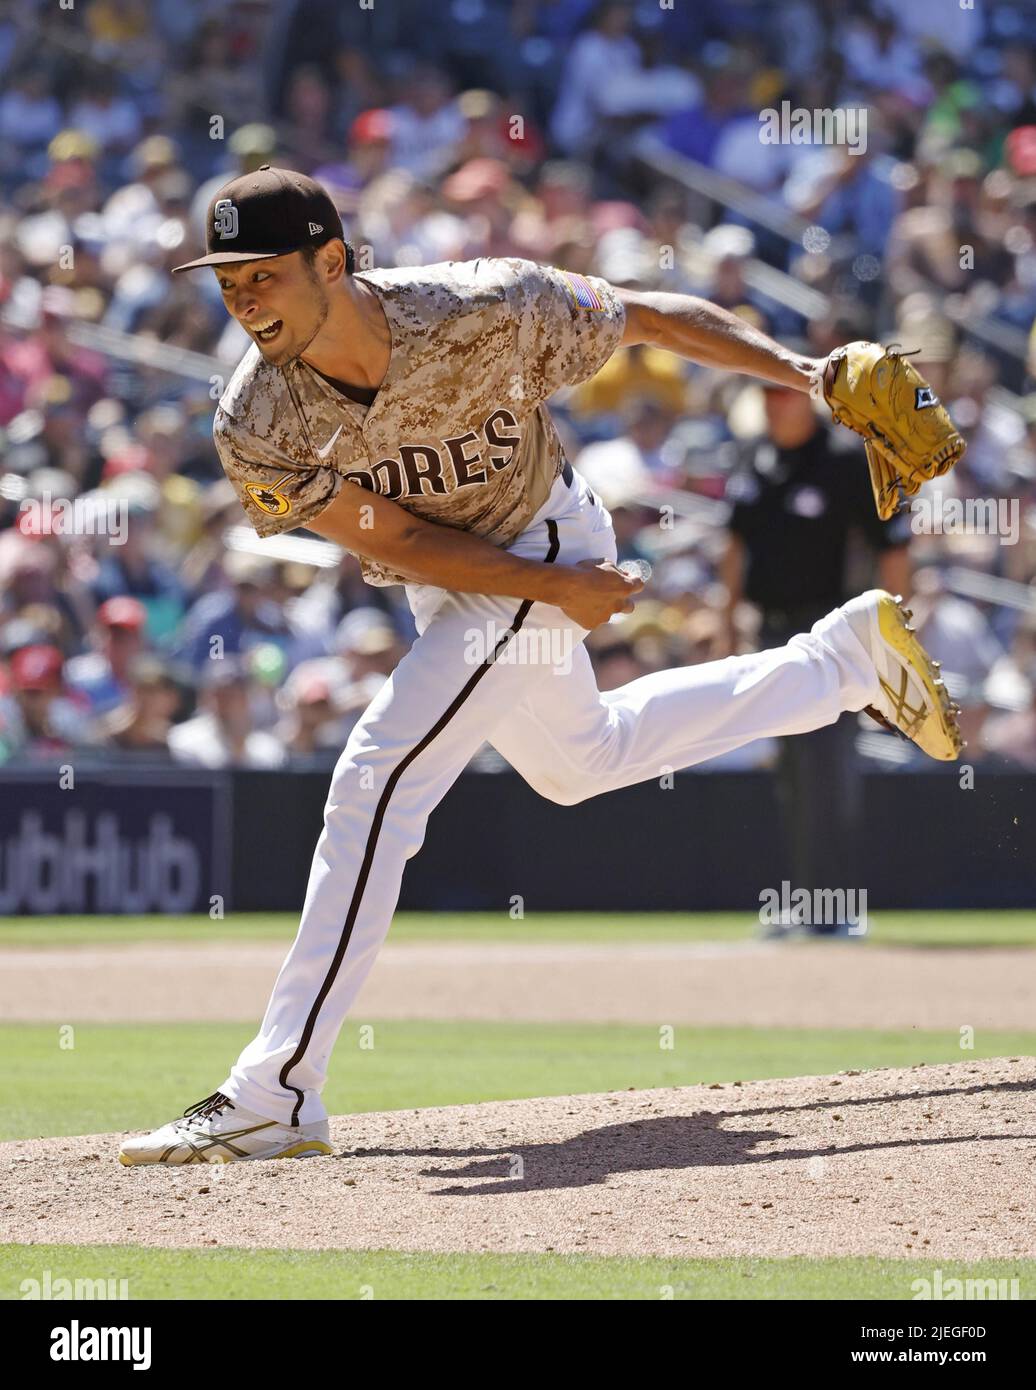 Yu Darvish of the San Diego Padres pitches in a baseball game against the  Philadelphia Phillies on June 26, 2022, at Petco Park in San Diego,  California. (Kyodo)==Kyodo Photo via Credit: Newscom/Alamy